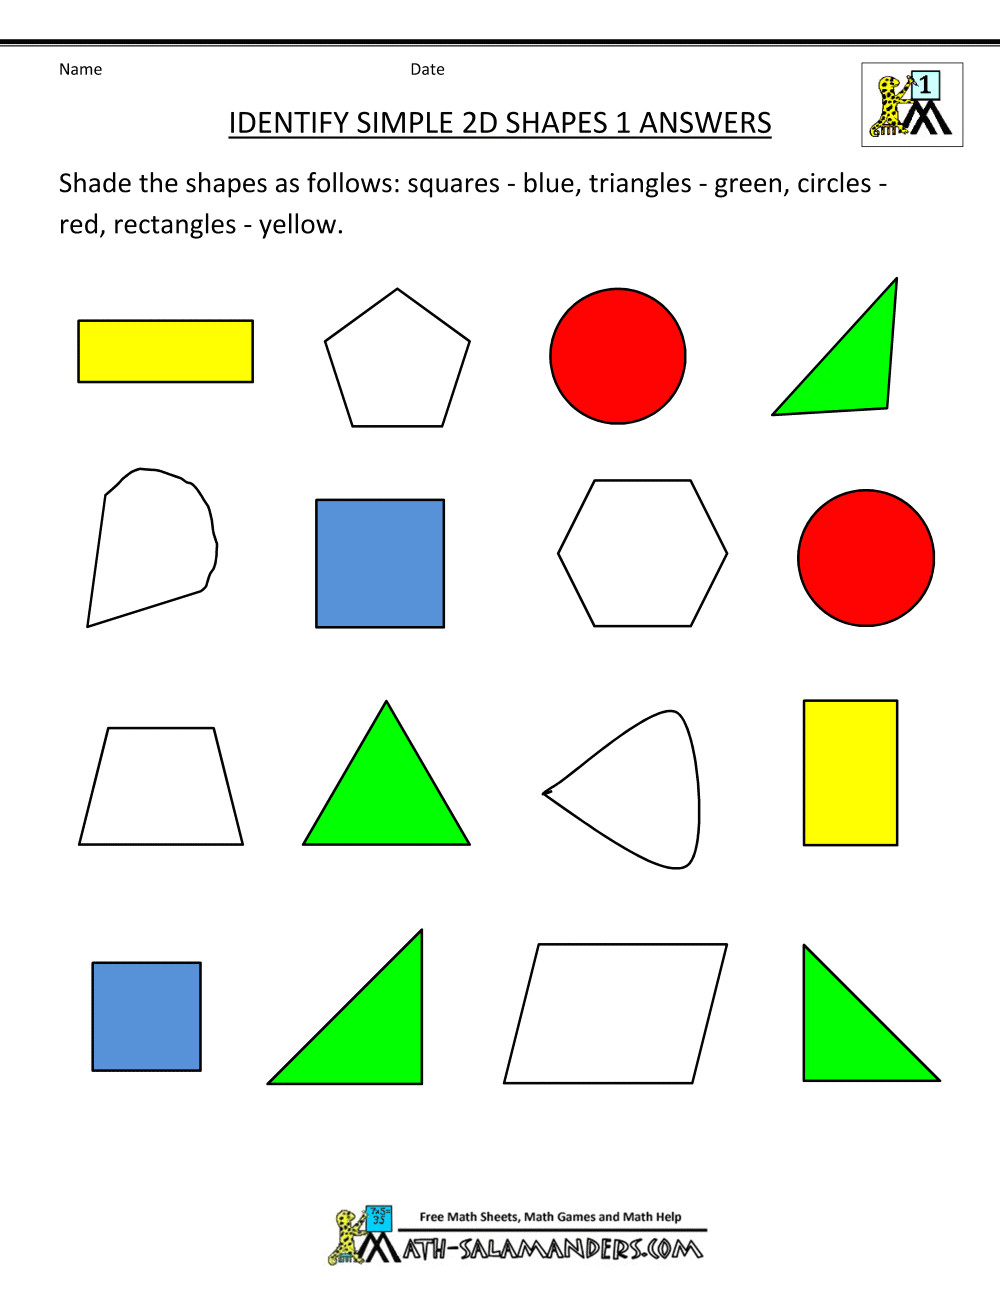 identify simple 2d shapes 1